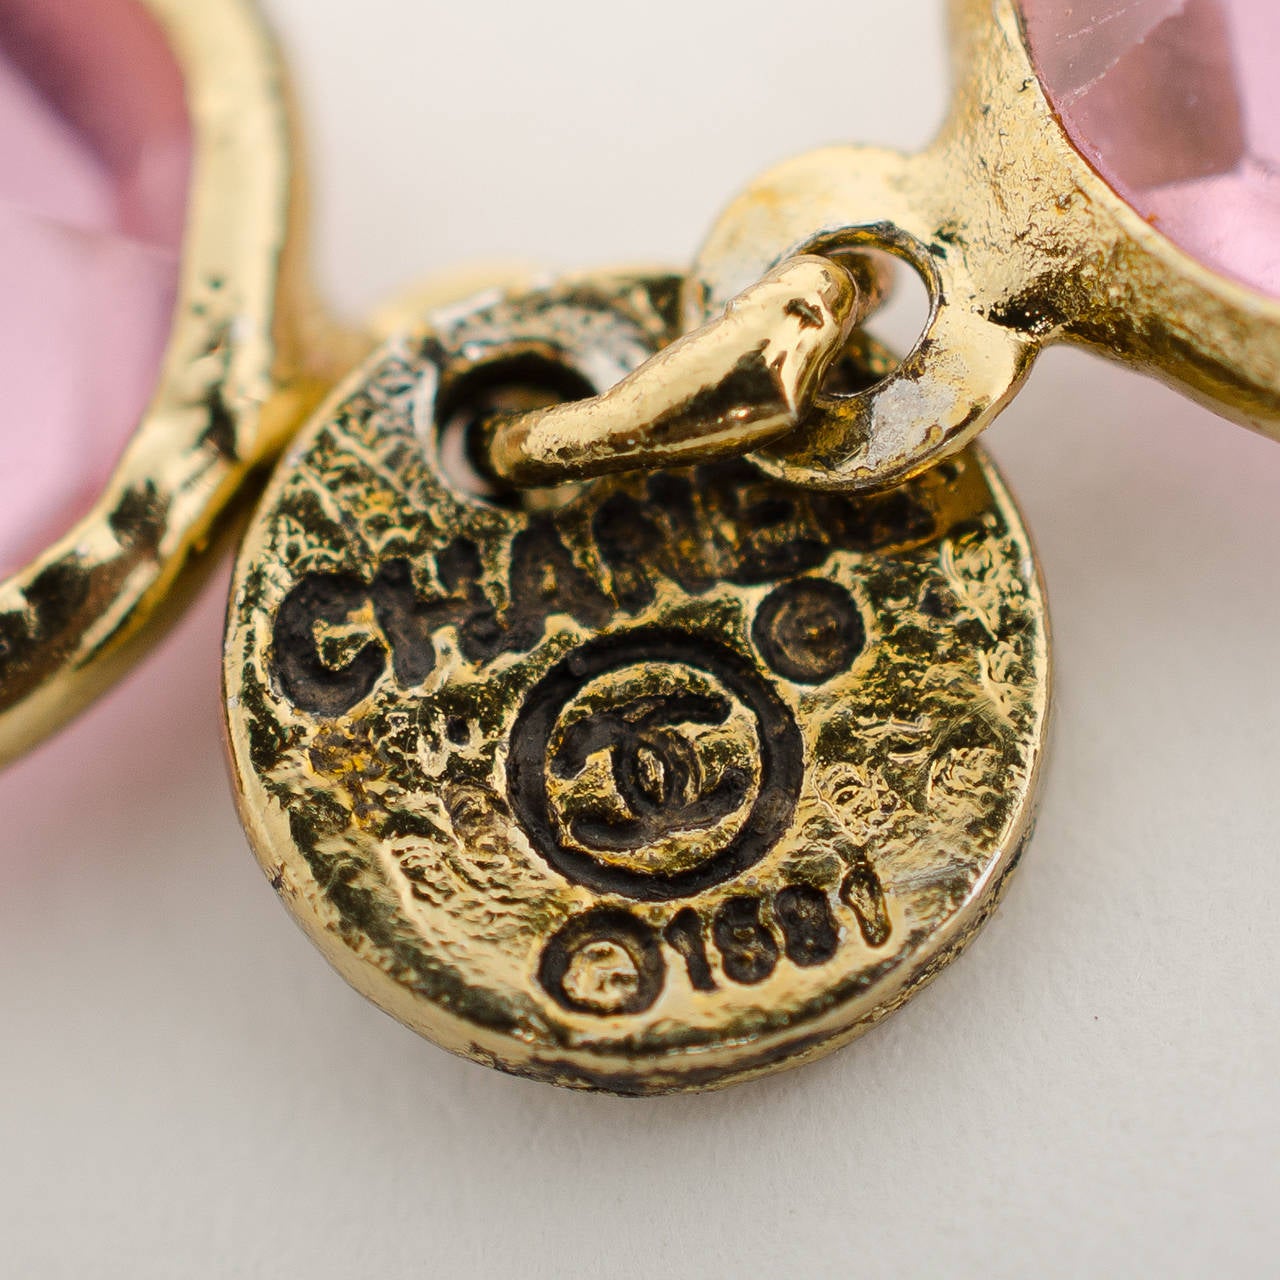 Chanel stamped 1981 Chicklet sautoir (necklace) of pink crystals and gold tone hardware.

One of the most recognized and coveted pieces of Chanel vintage jewelry, the crystal sautoir remains the fashion statement it was when introduced in the